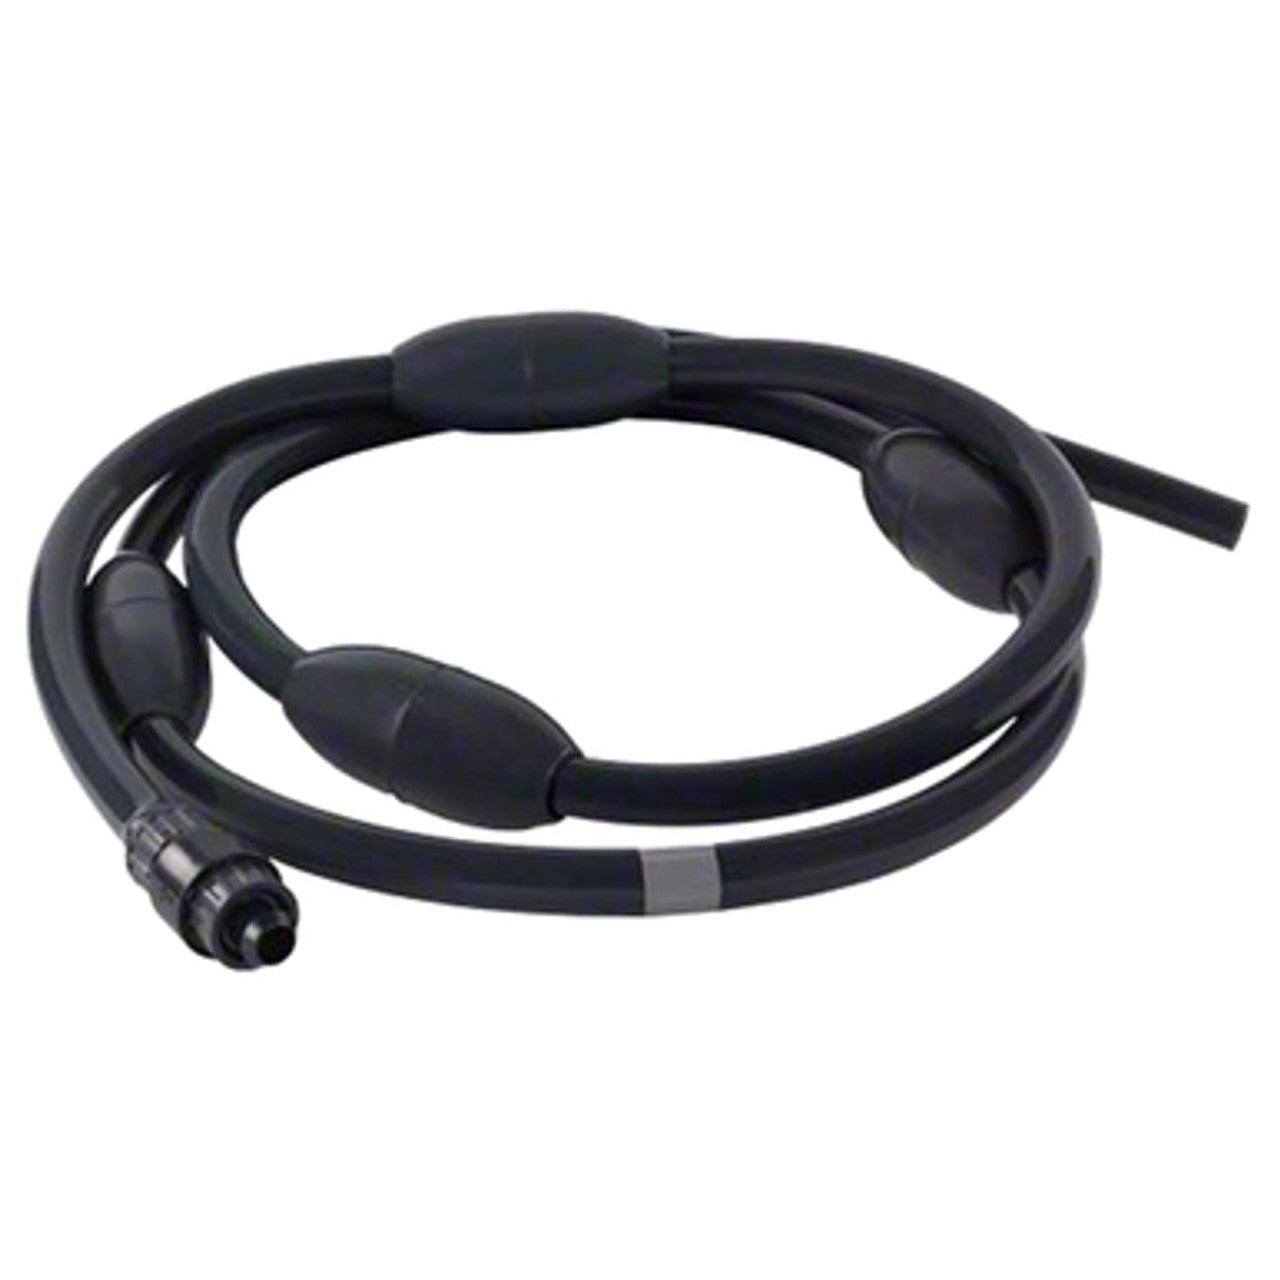 Pentair 10' Hard Feed Line Hose Kit for Racer Pressure Side Cleaner 360266 - Cleaner Parts - img-1